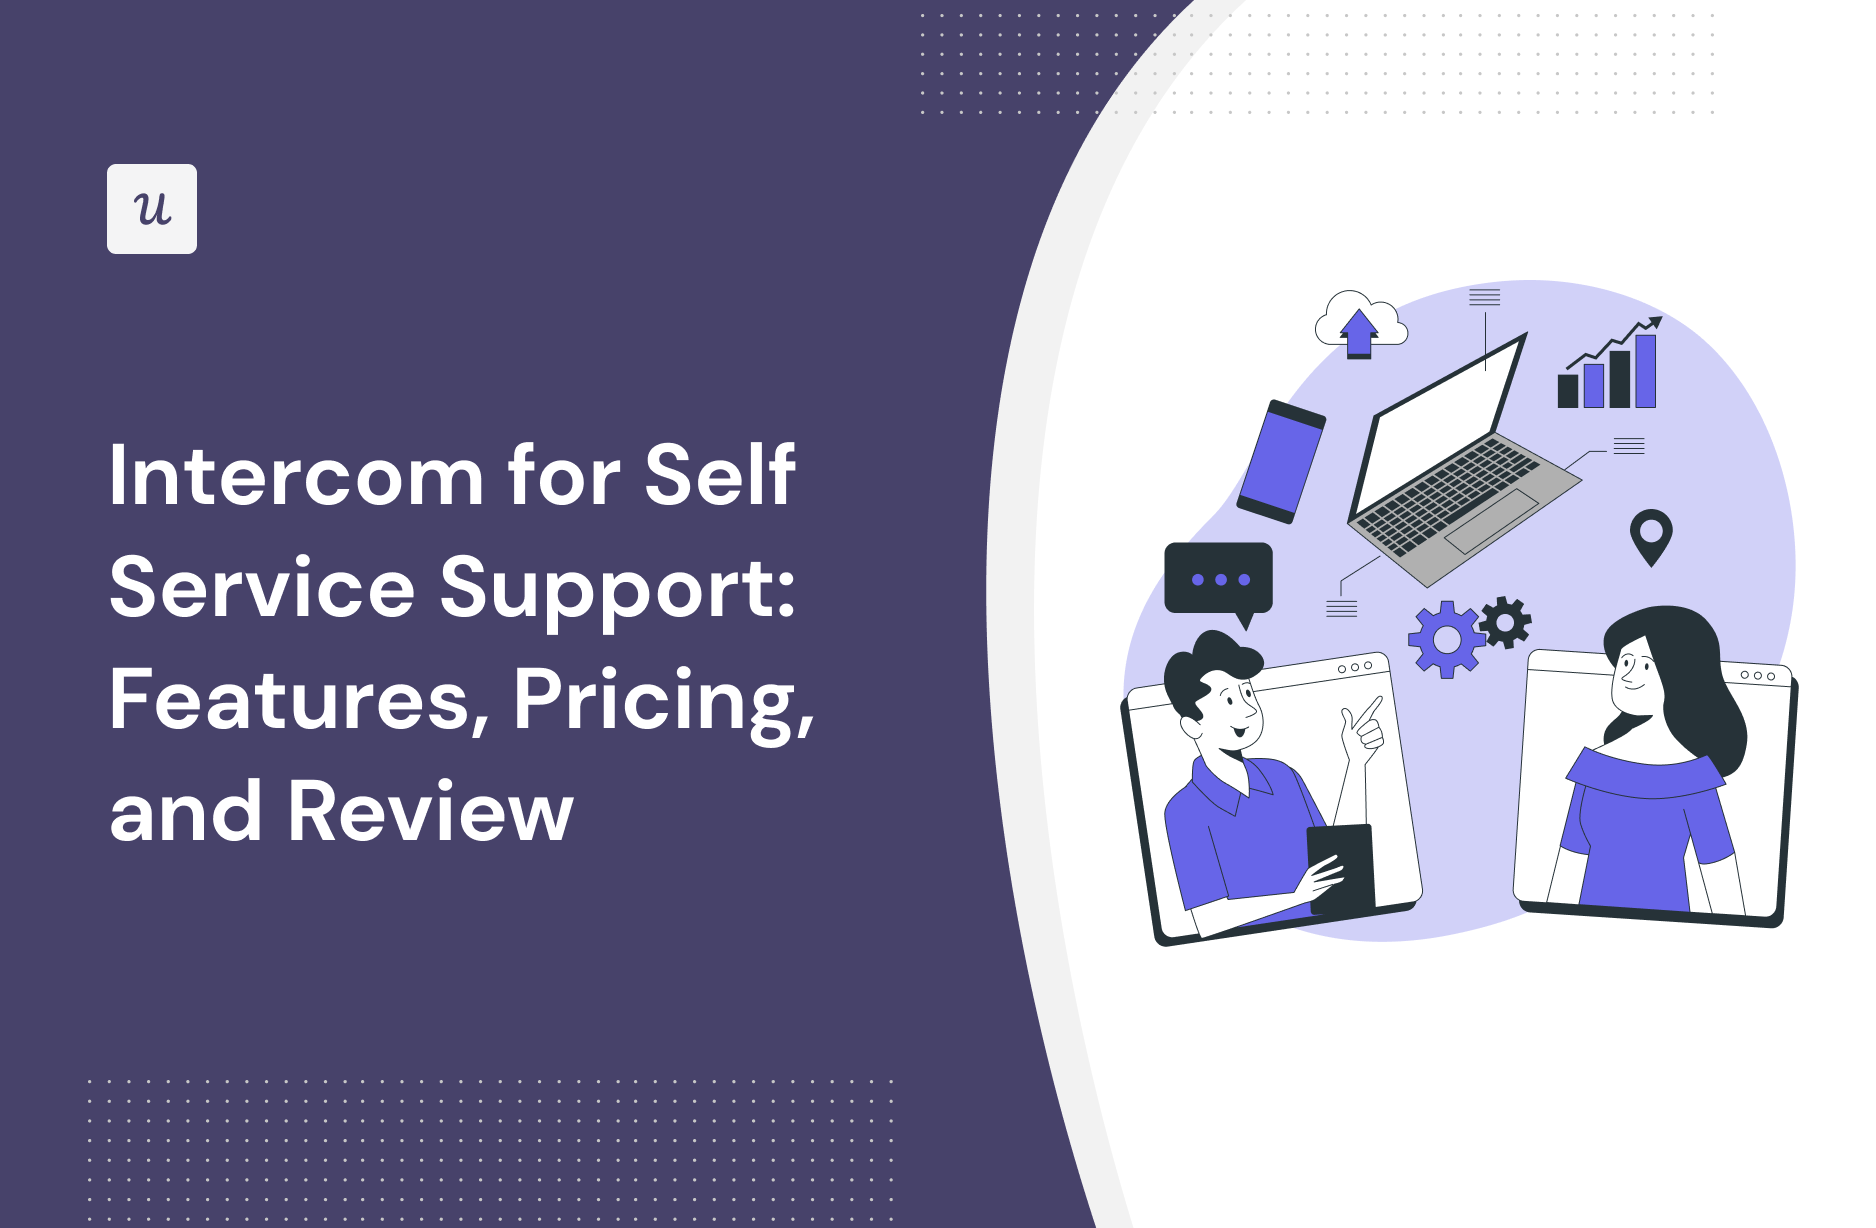 Intercom for Self Service Support: Features, Pricing, and Review